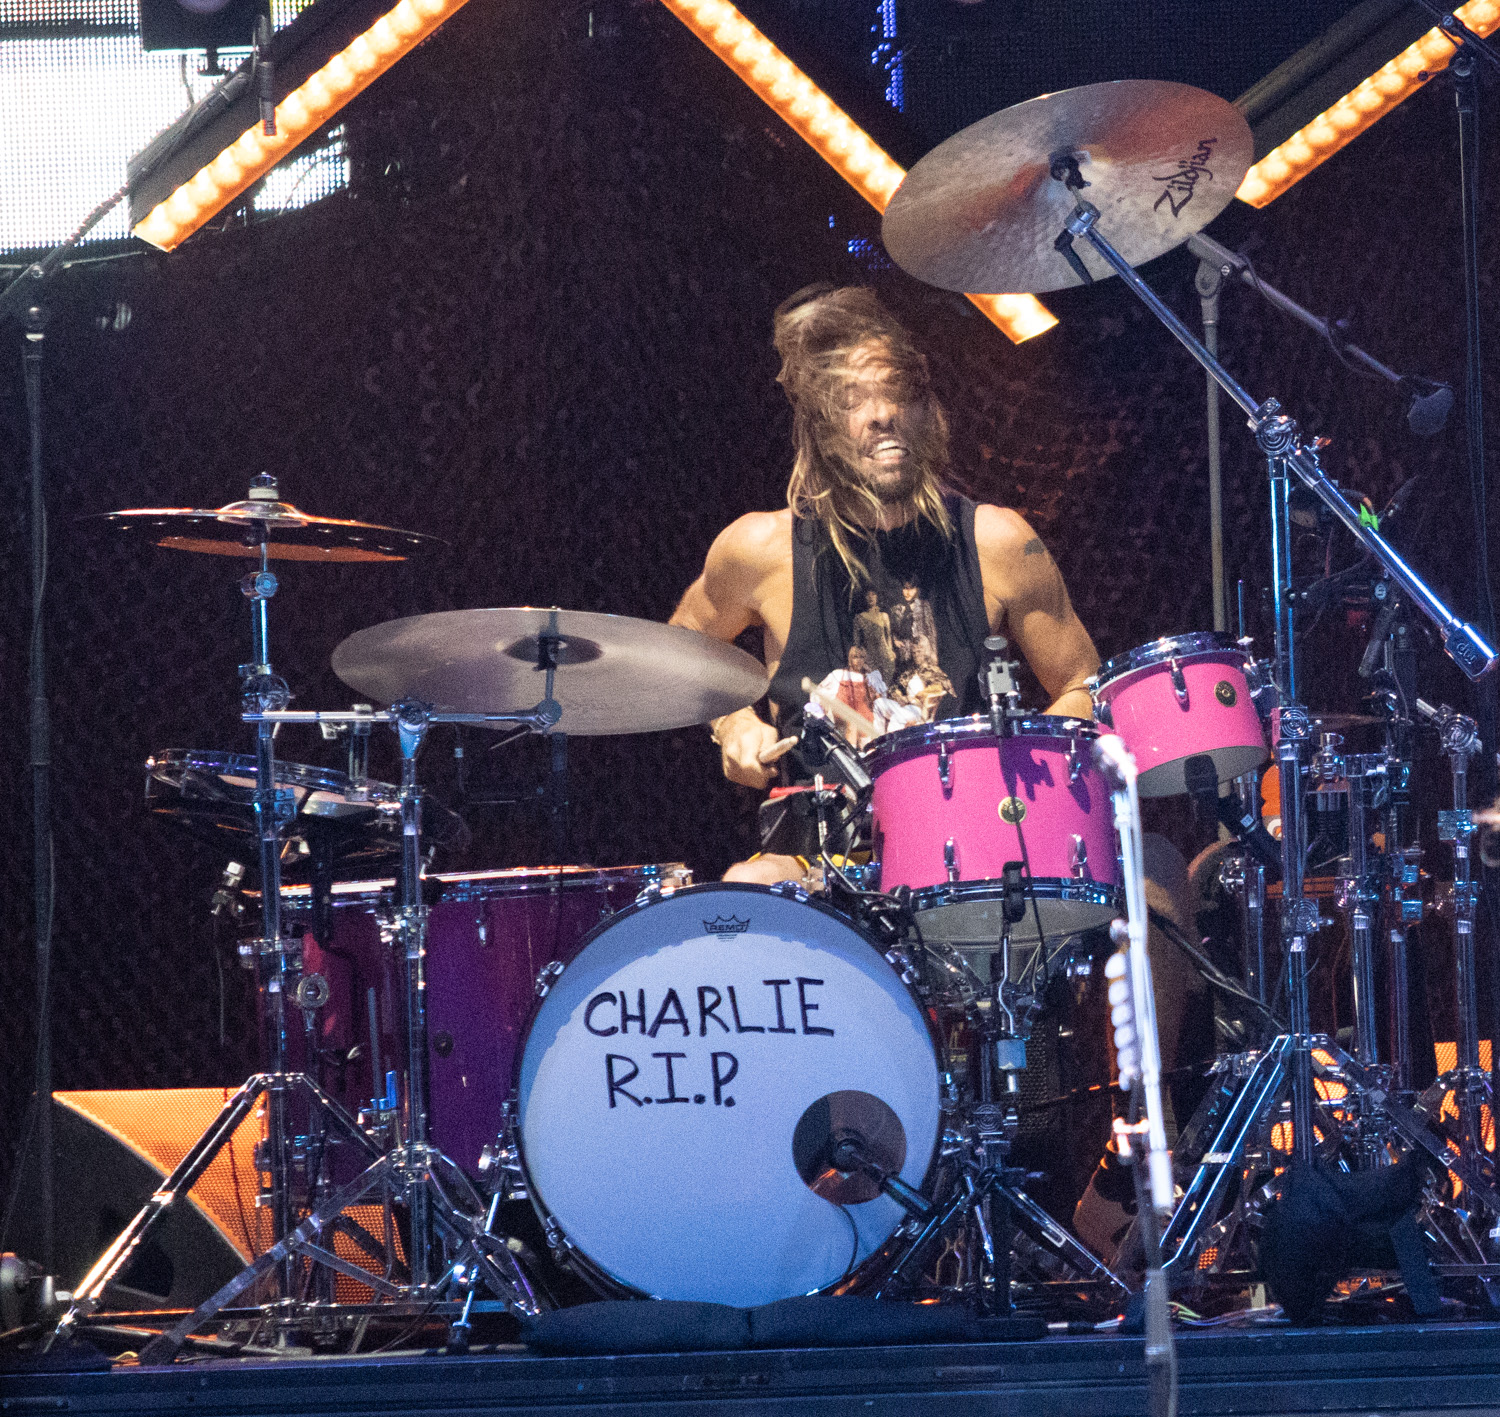 PODCAST – Monday, March 28: Taylor Hawkins RIP; The Foo Fighters Final CT Concert; Will Smith At The Oscars